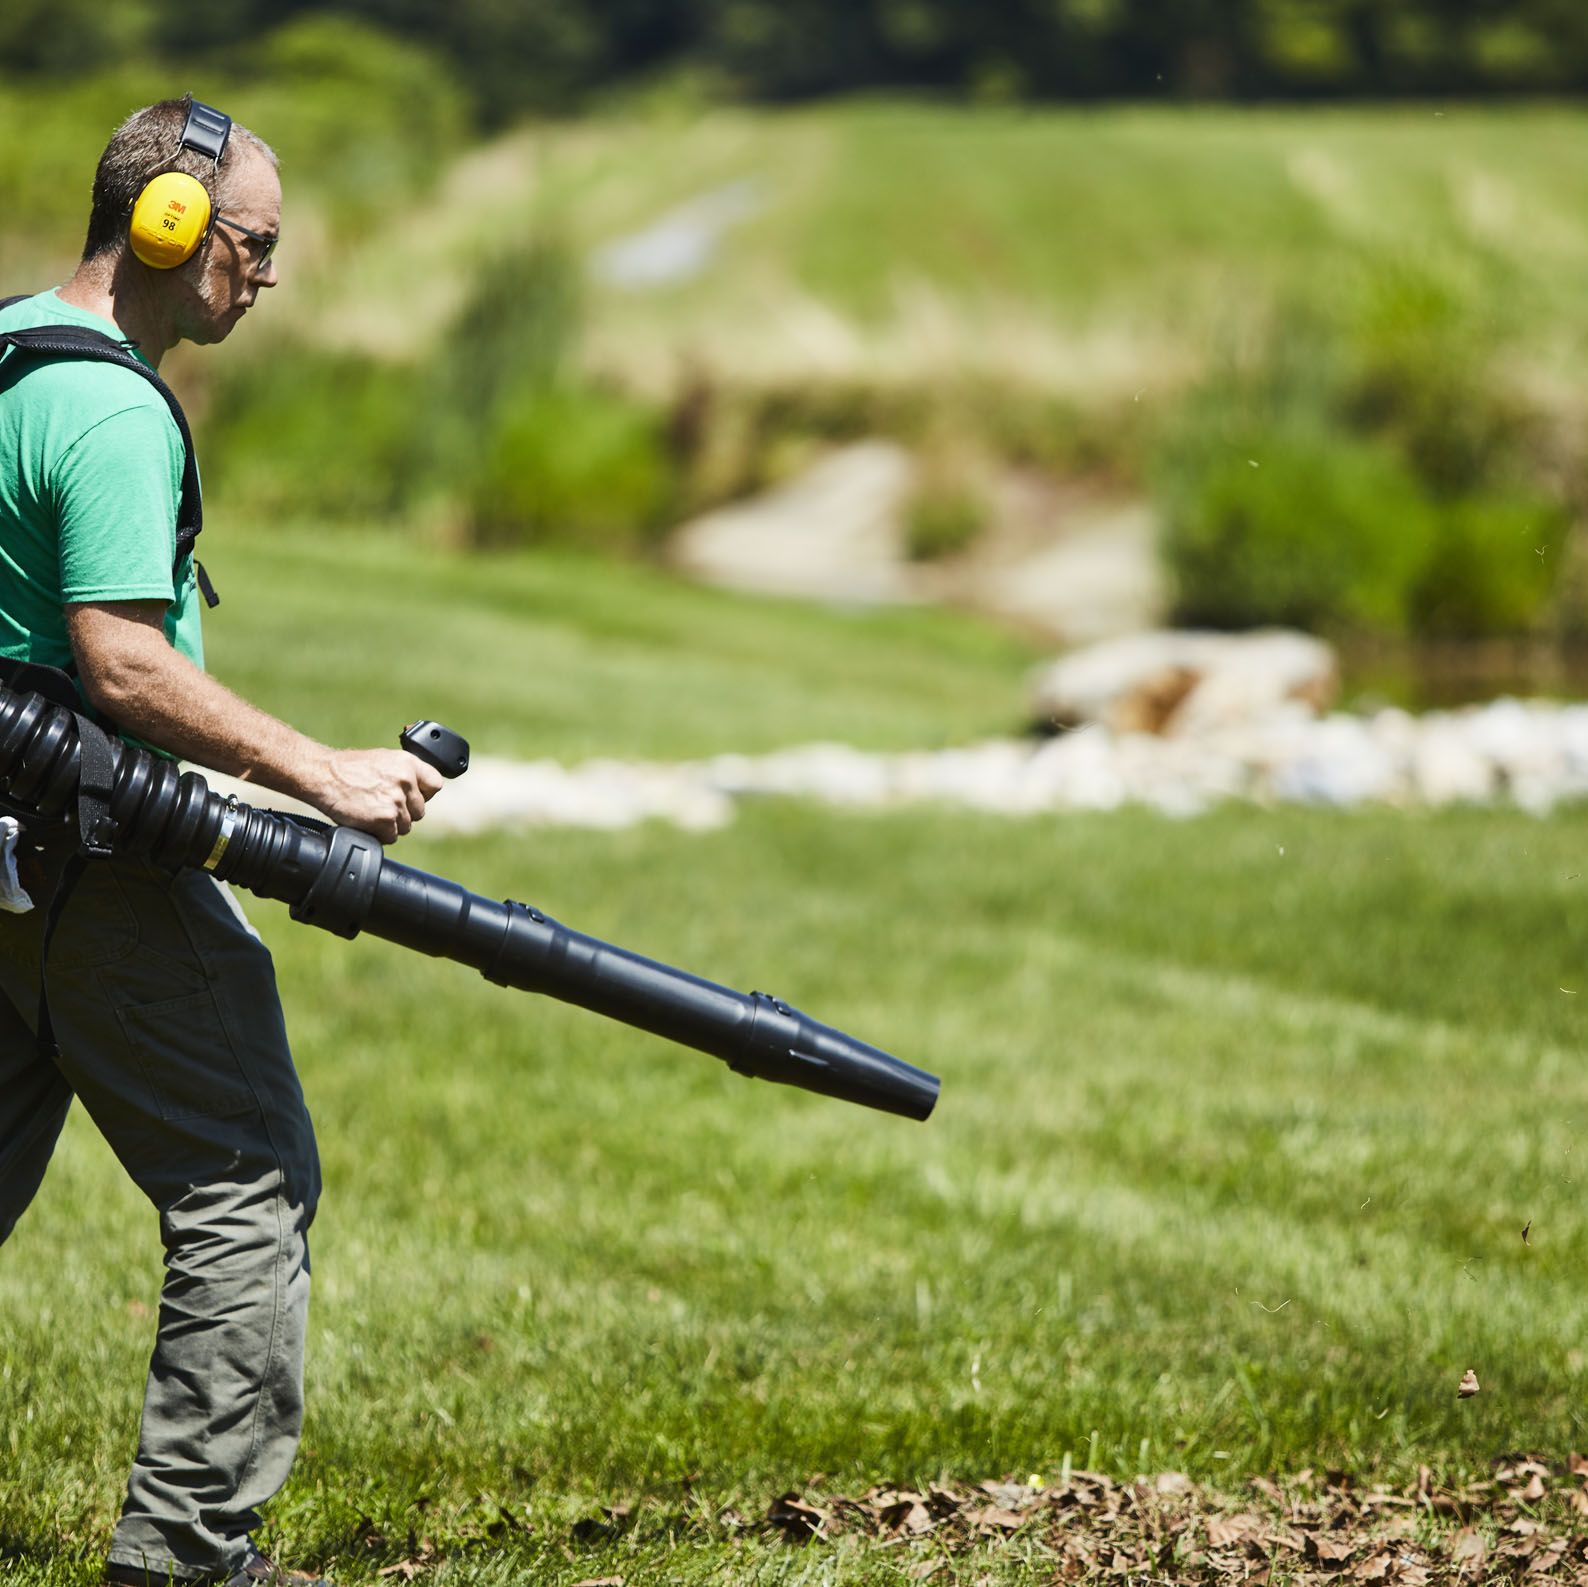 Our Editors Tested the Very Best Leaf Blowers You Can Buy